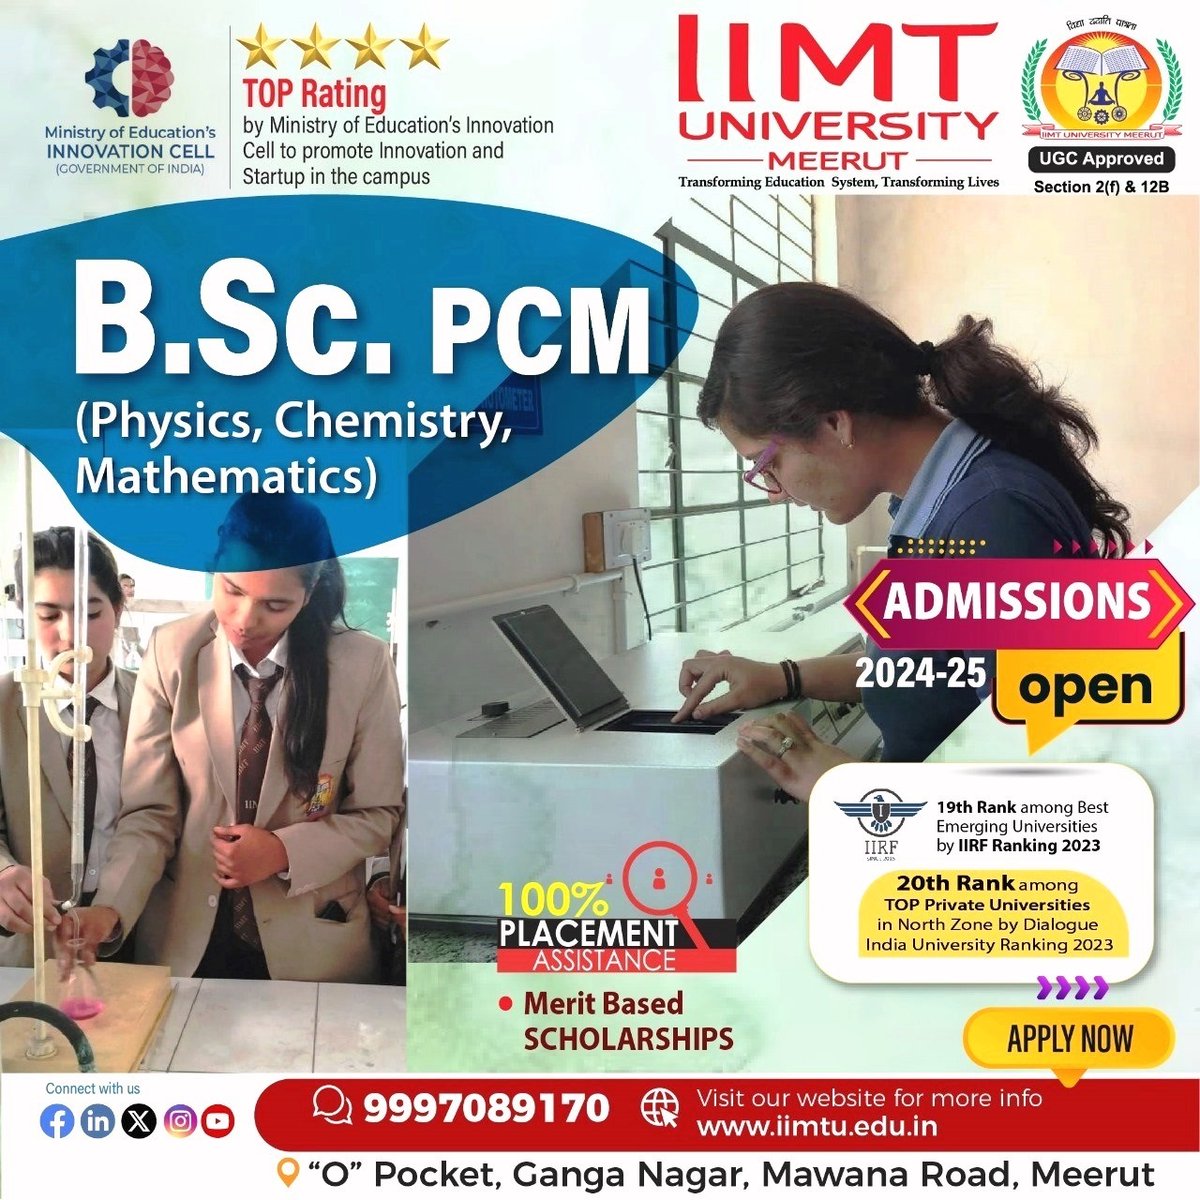 Admissions Open in B. Sc -PCM for the session 2024-25

#AdmissionsOpen2024 #BScAdmissions #Admissions2024
#physics #chemistry #mathematics #students

#IIMTU #TransformingEducationSystem #TransformingLives

🌐iimtu.edu.in  📱+91-9045954124

#AdmissionsOpen2024